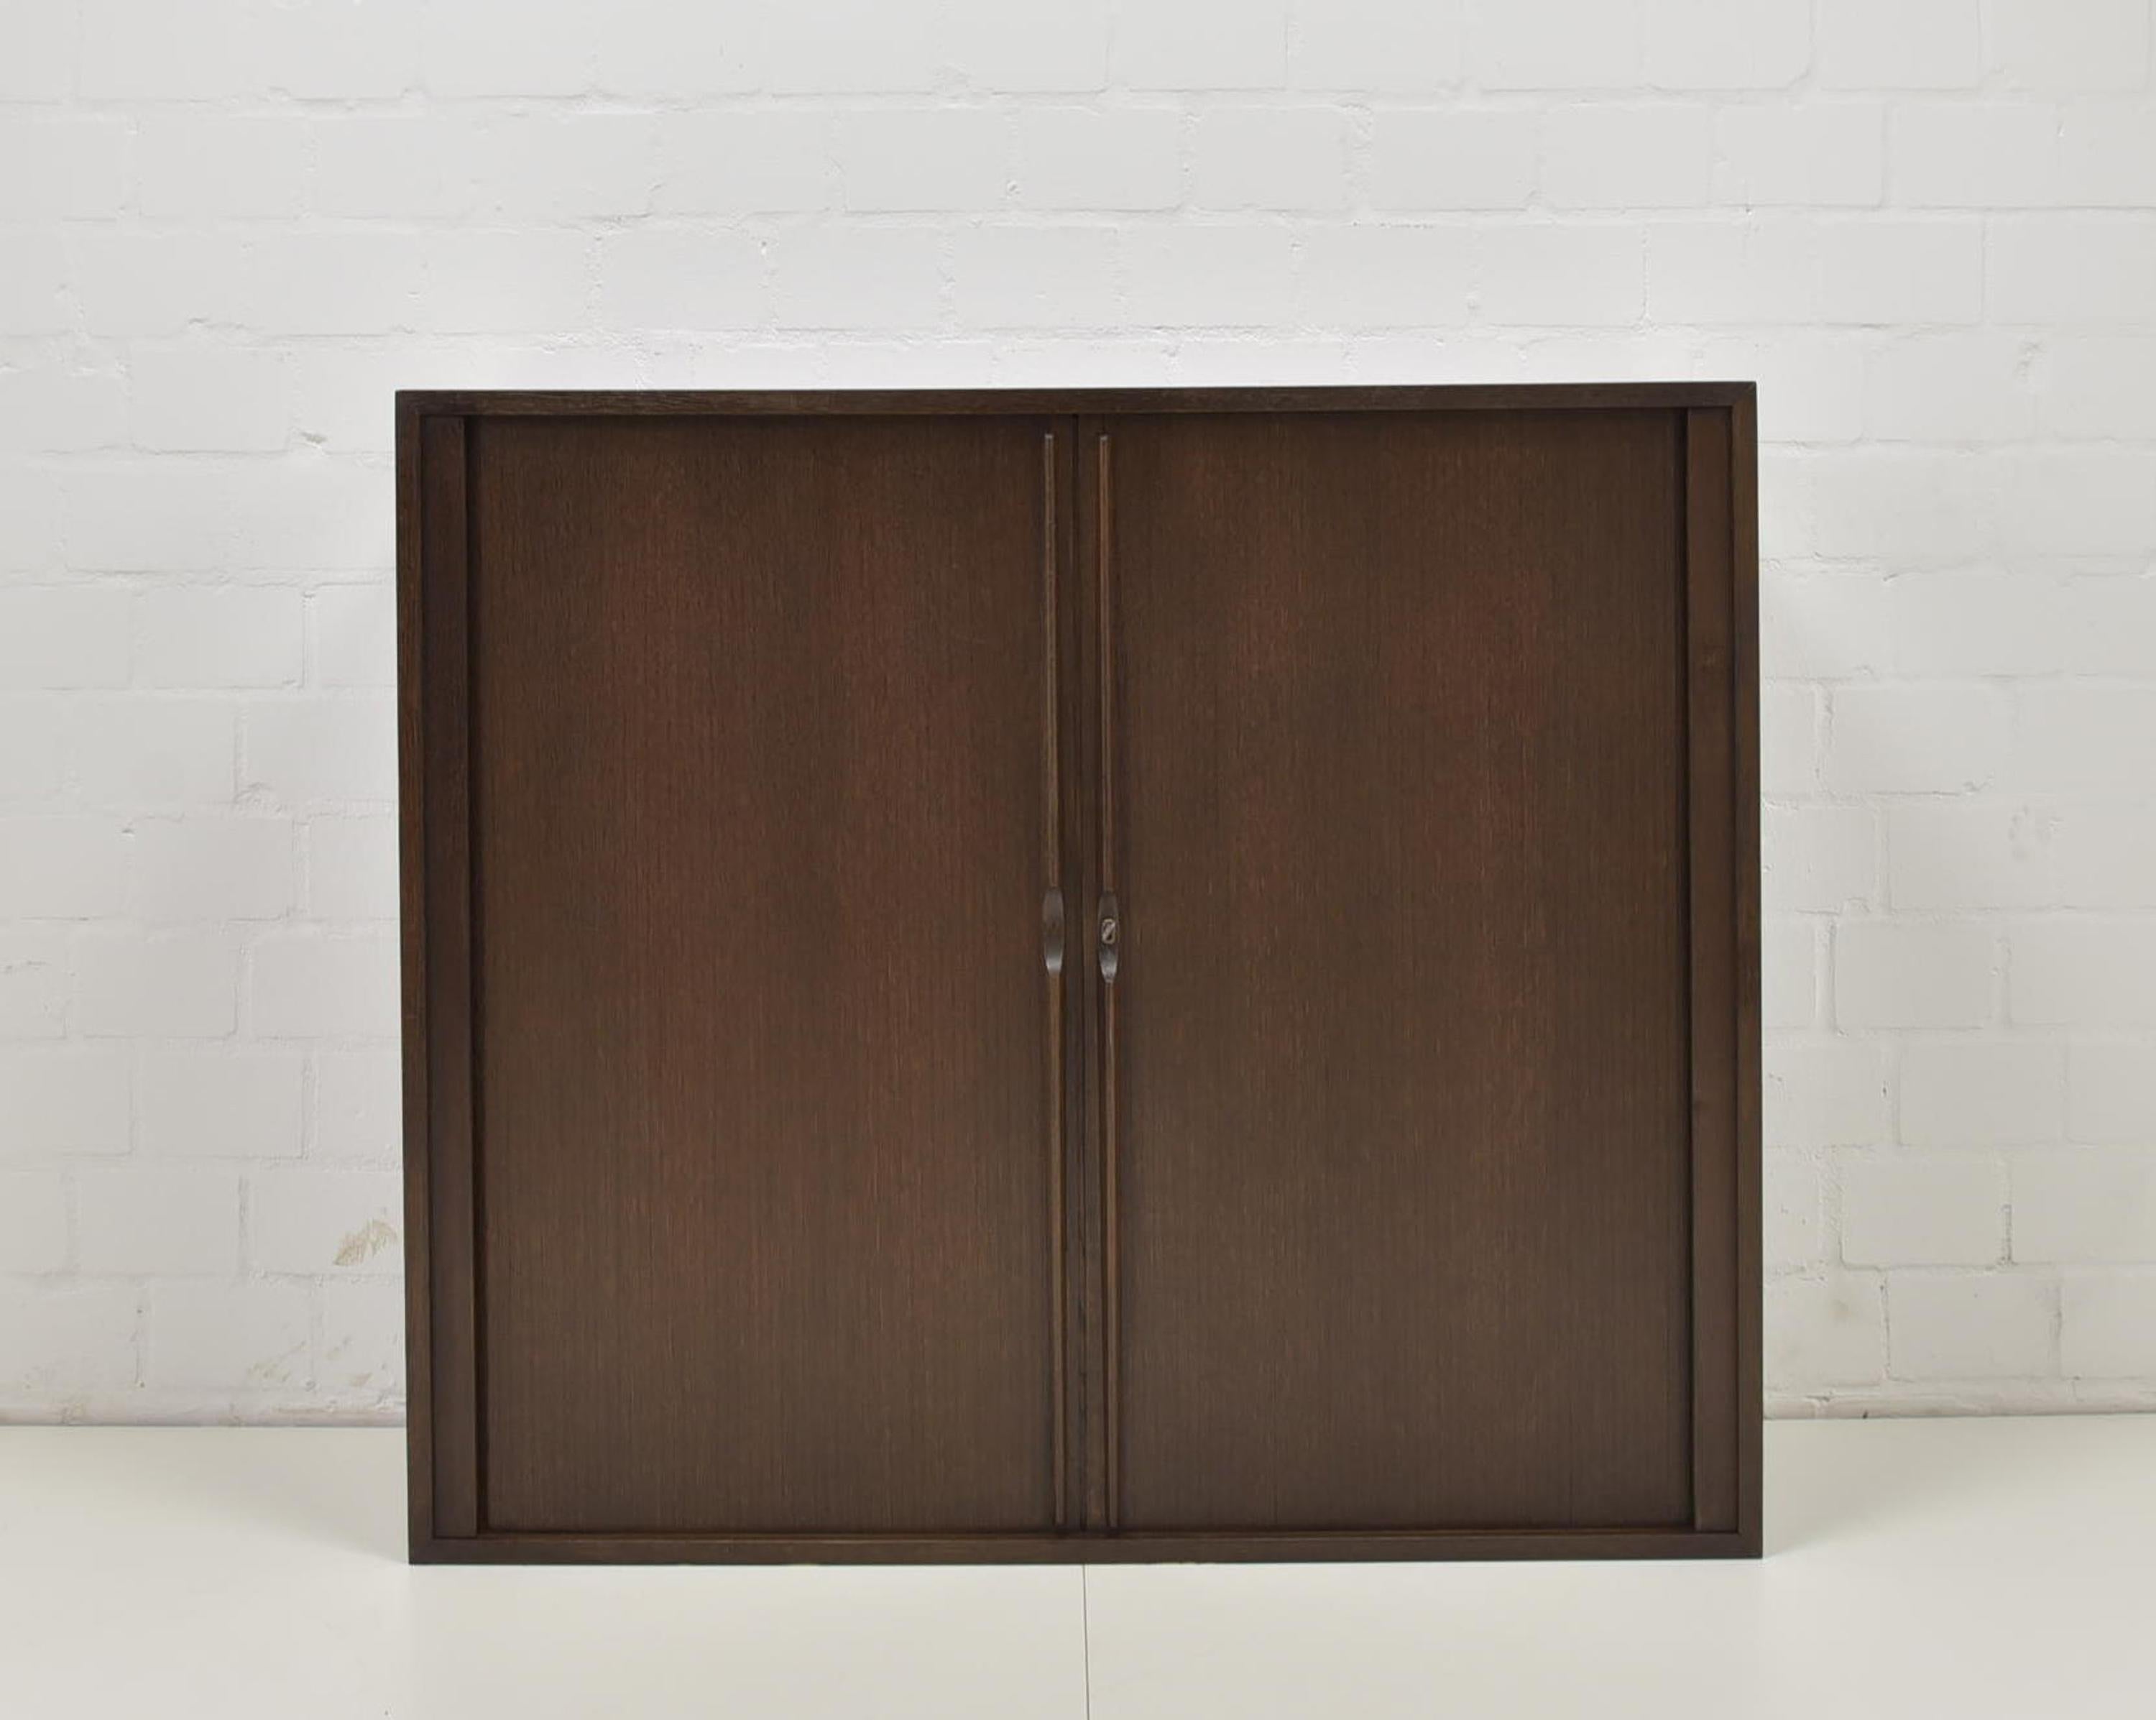 Filing cabinet restored around 1960 office cabinet sliding doors sideboard

Features:
Oak veneer
Model with two sliding doors and three shelves
Height-adjustable shelves
Smooth sliding mechanism
Beautifully shaped handles
Timeless,